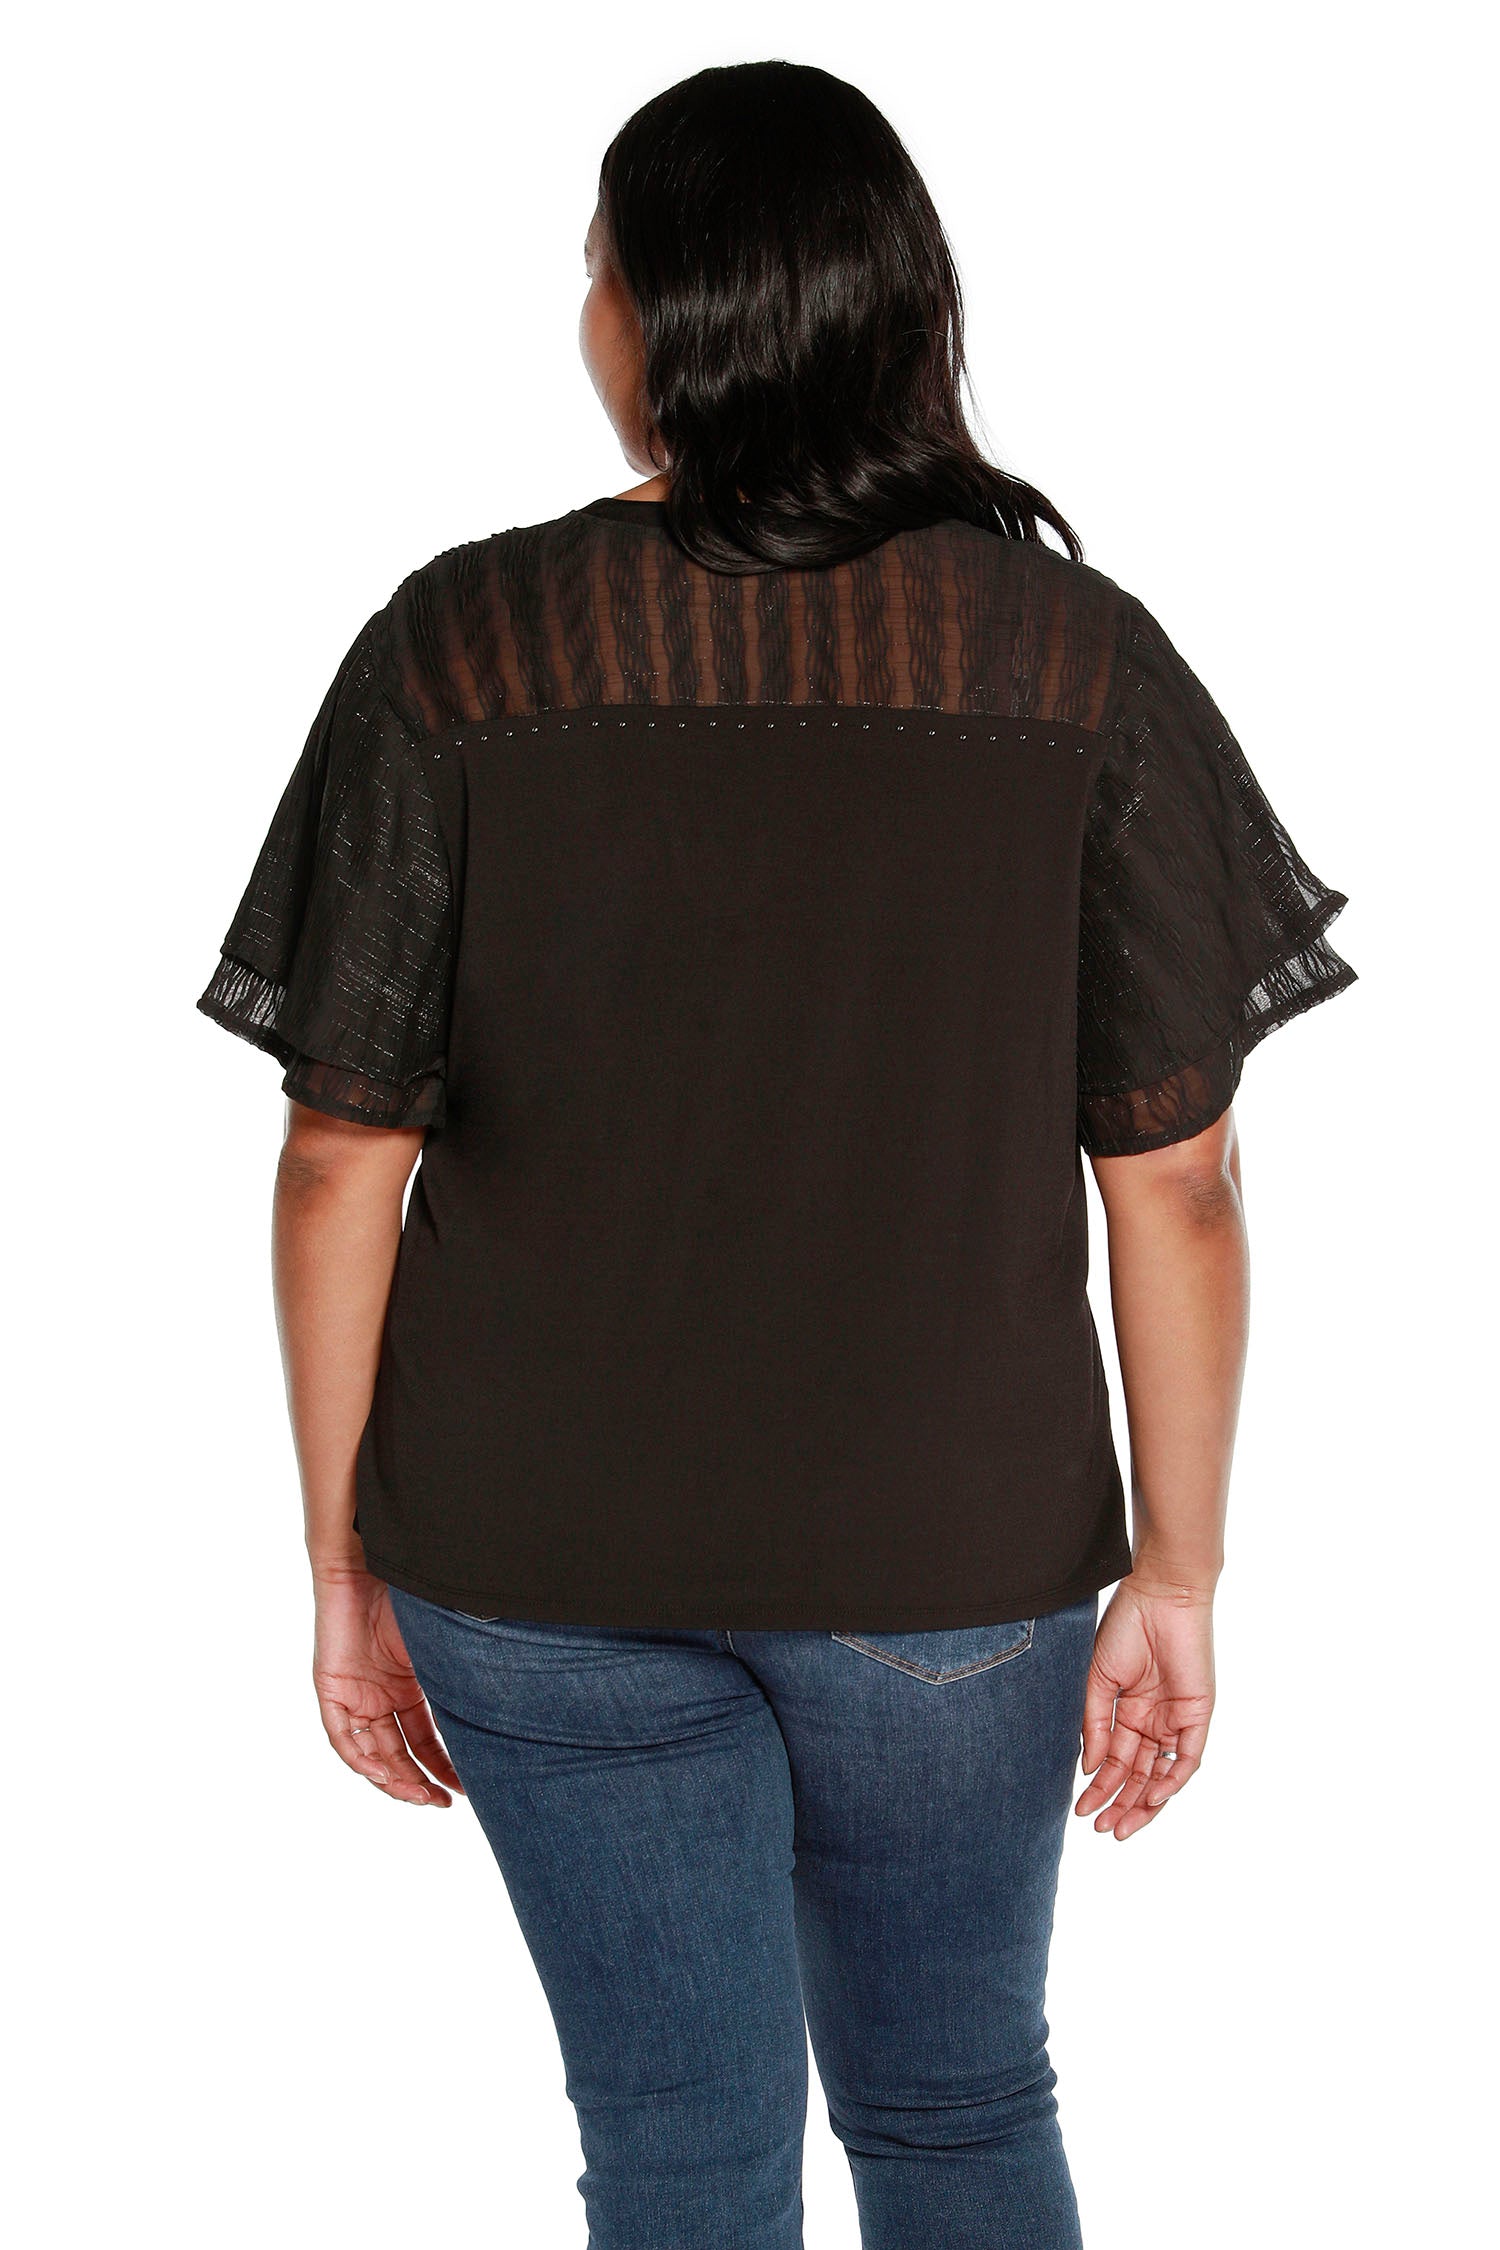 Women's Ruffled Bell Sleeve Top with Sheer Yoke and Sleeves and Nailhead Trim | Curvy